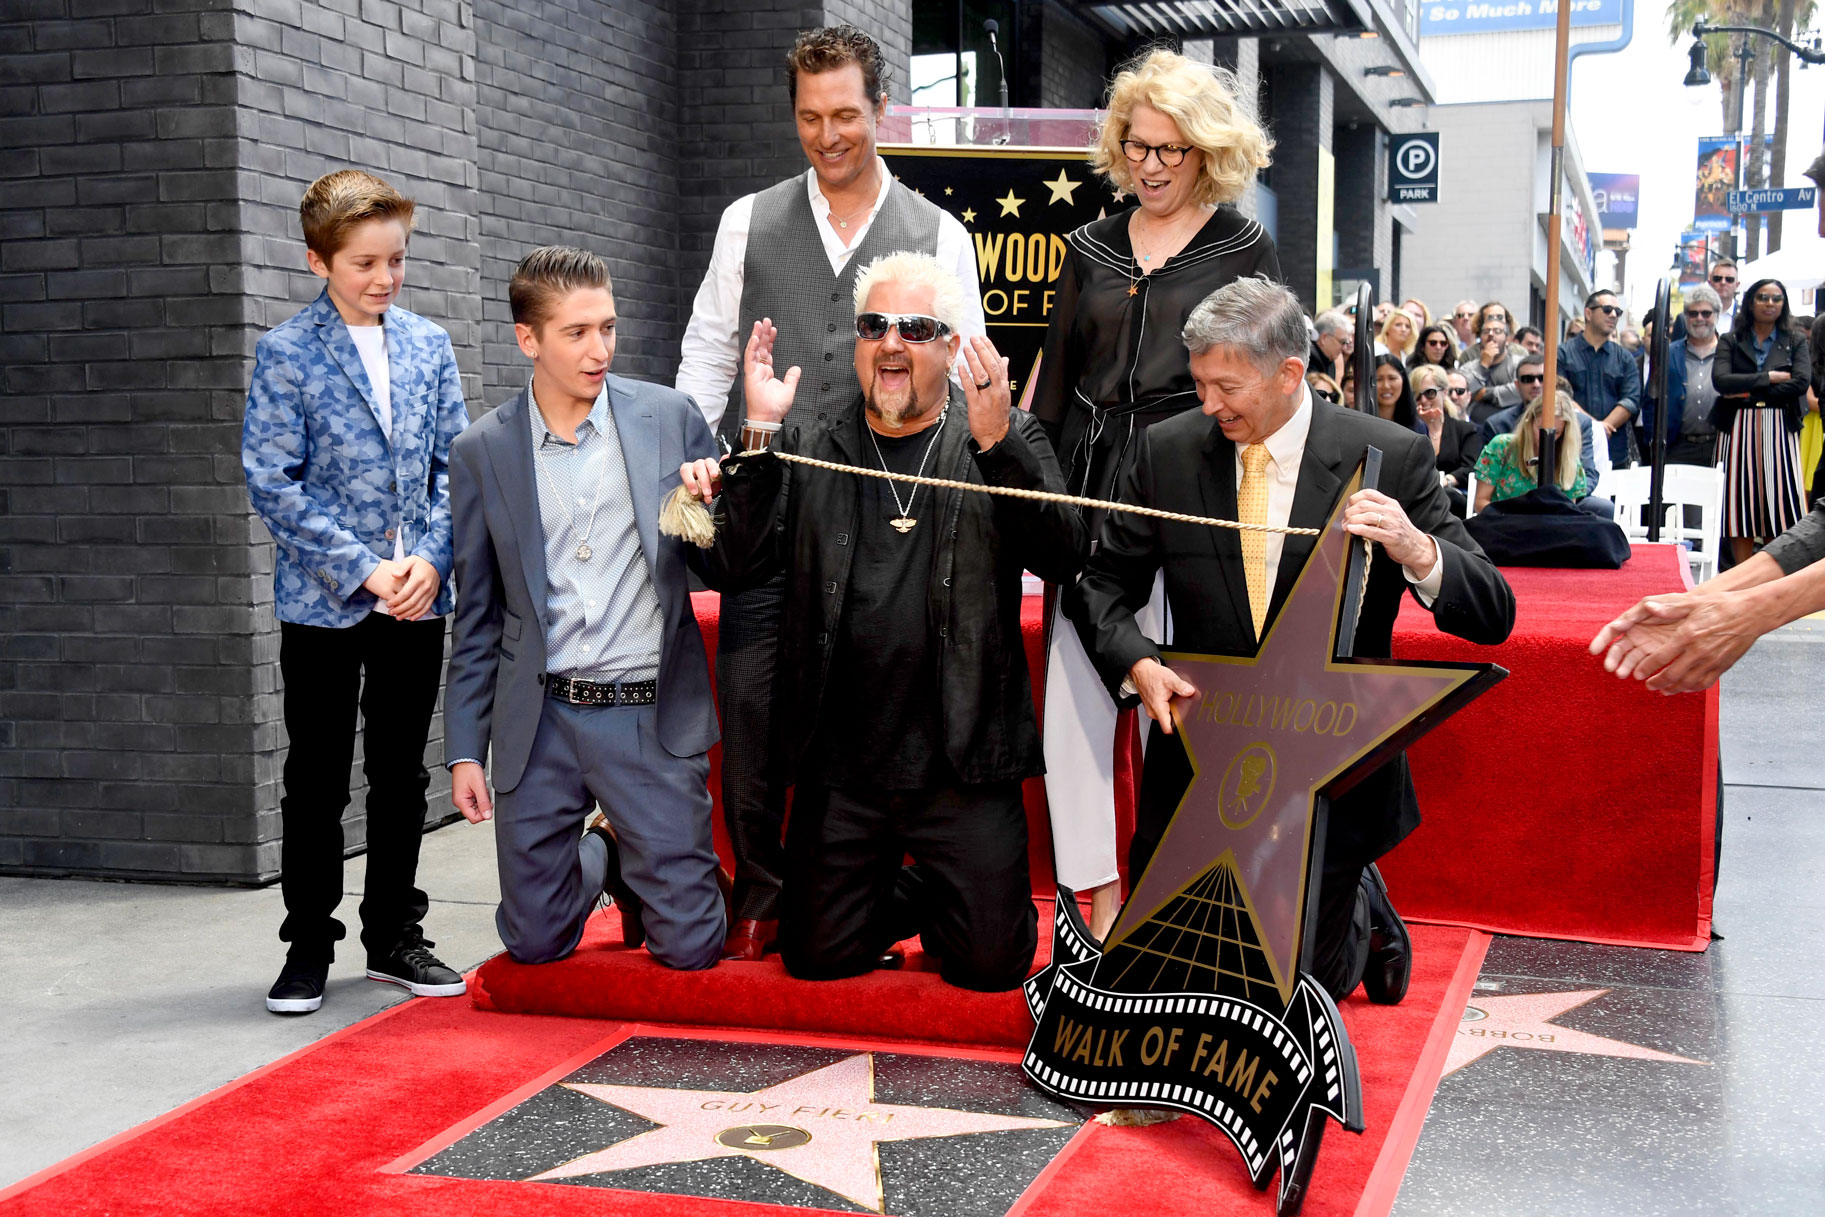 Guy Fieri on Making Family His Priority and His Calling to Give Back